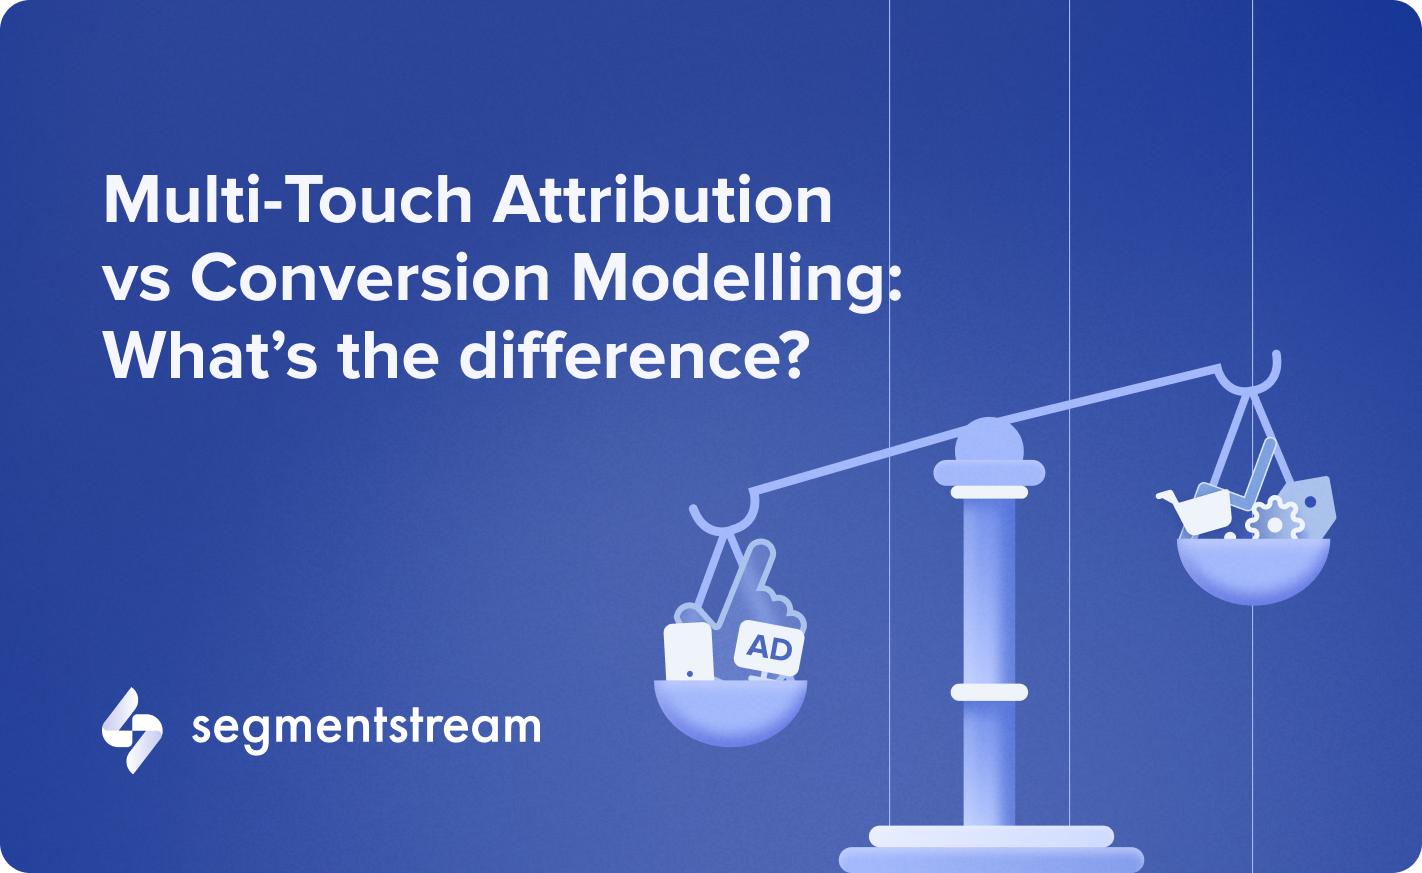 Multi-Touch Attribution vs Conversion Modelling: What’s the difference?